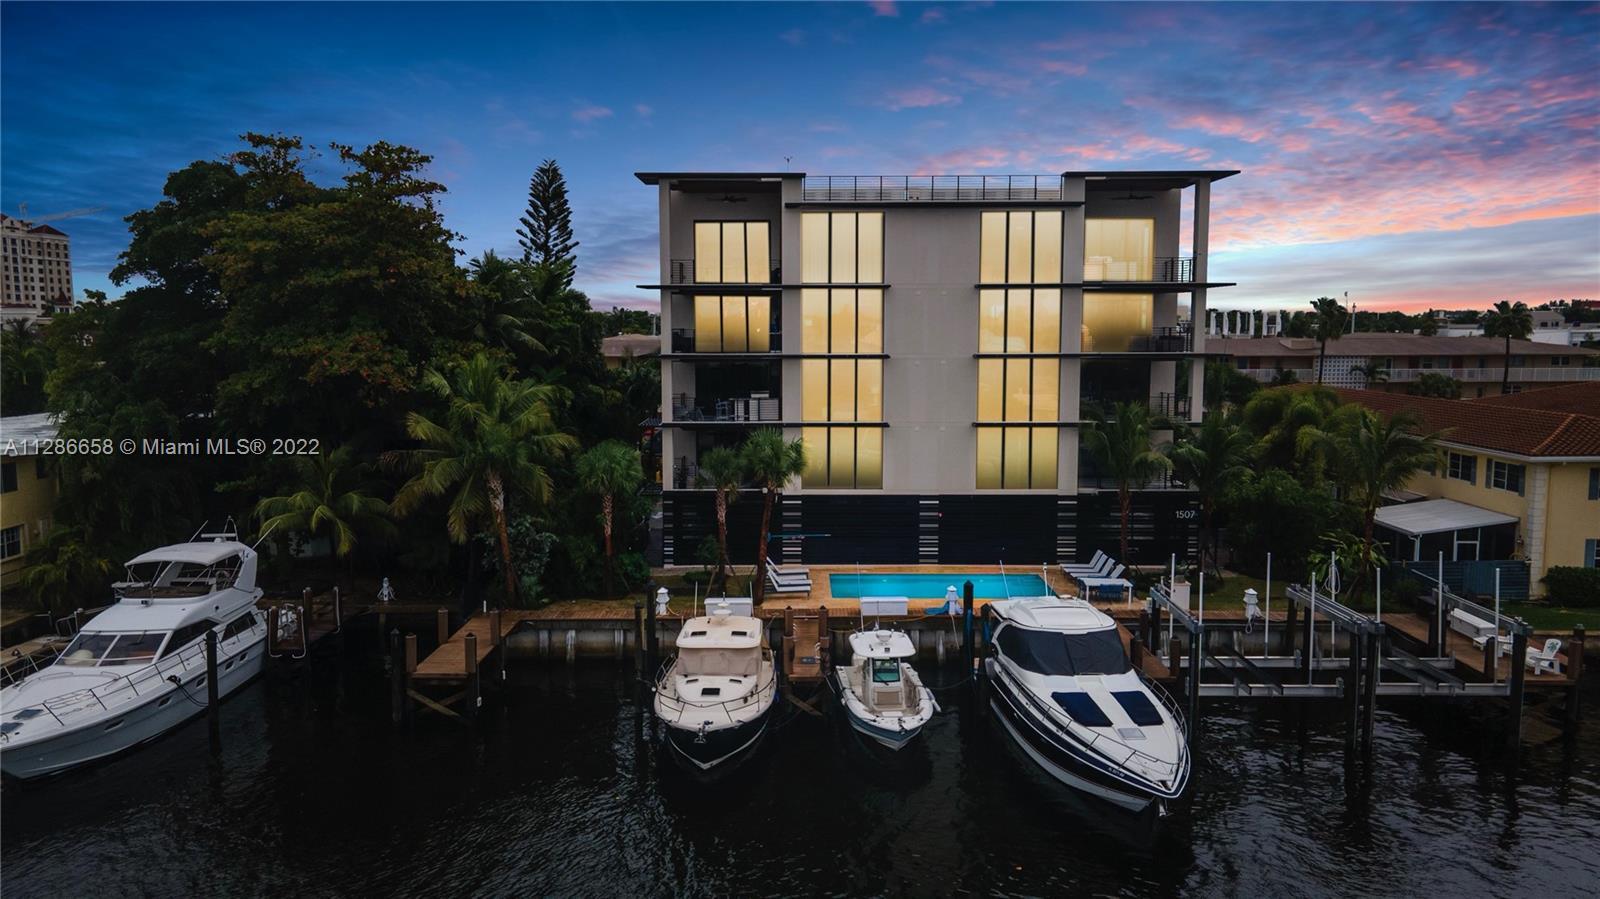 Located on the 4th floor in Harbor’s Edge in Lauderdale Harbors. This modern 3-bed, 3-bath new const